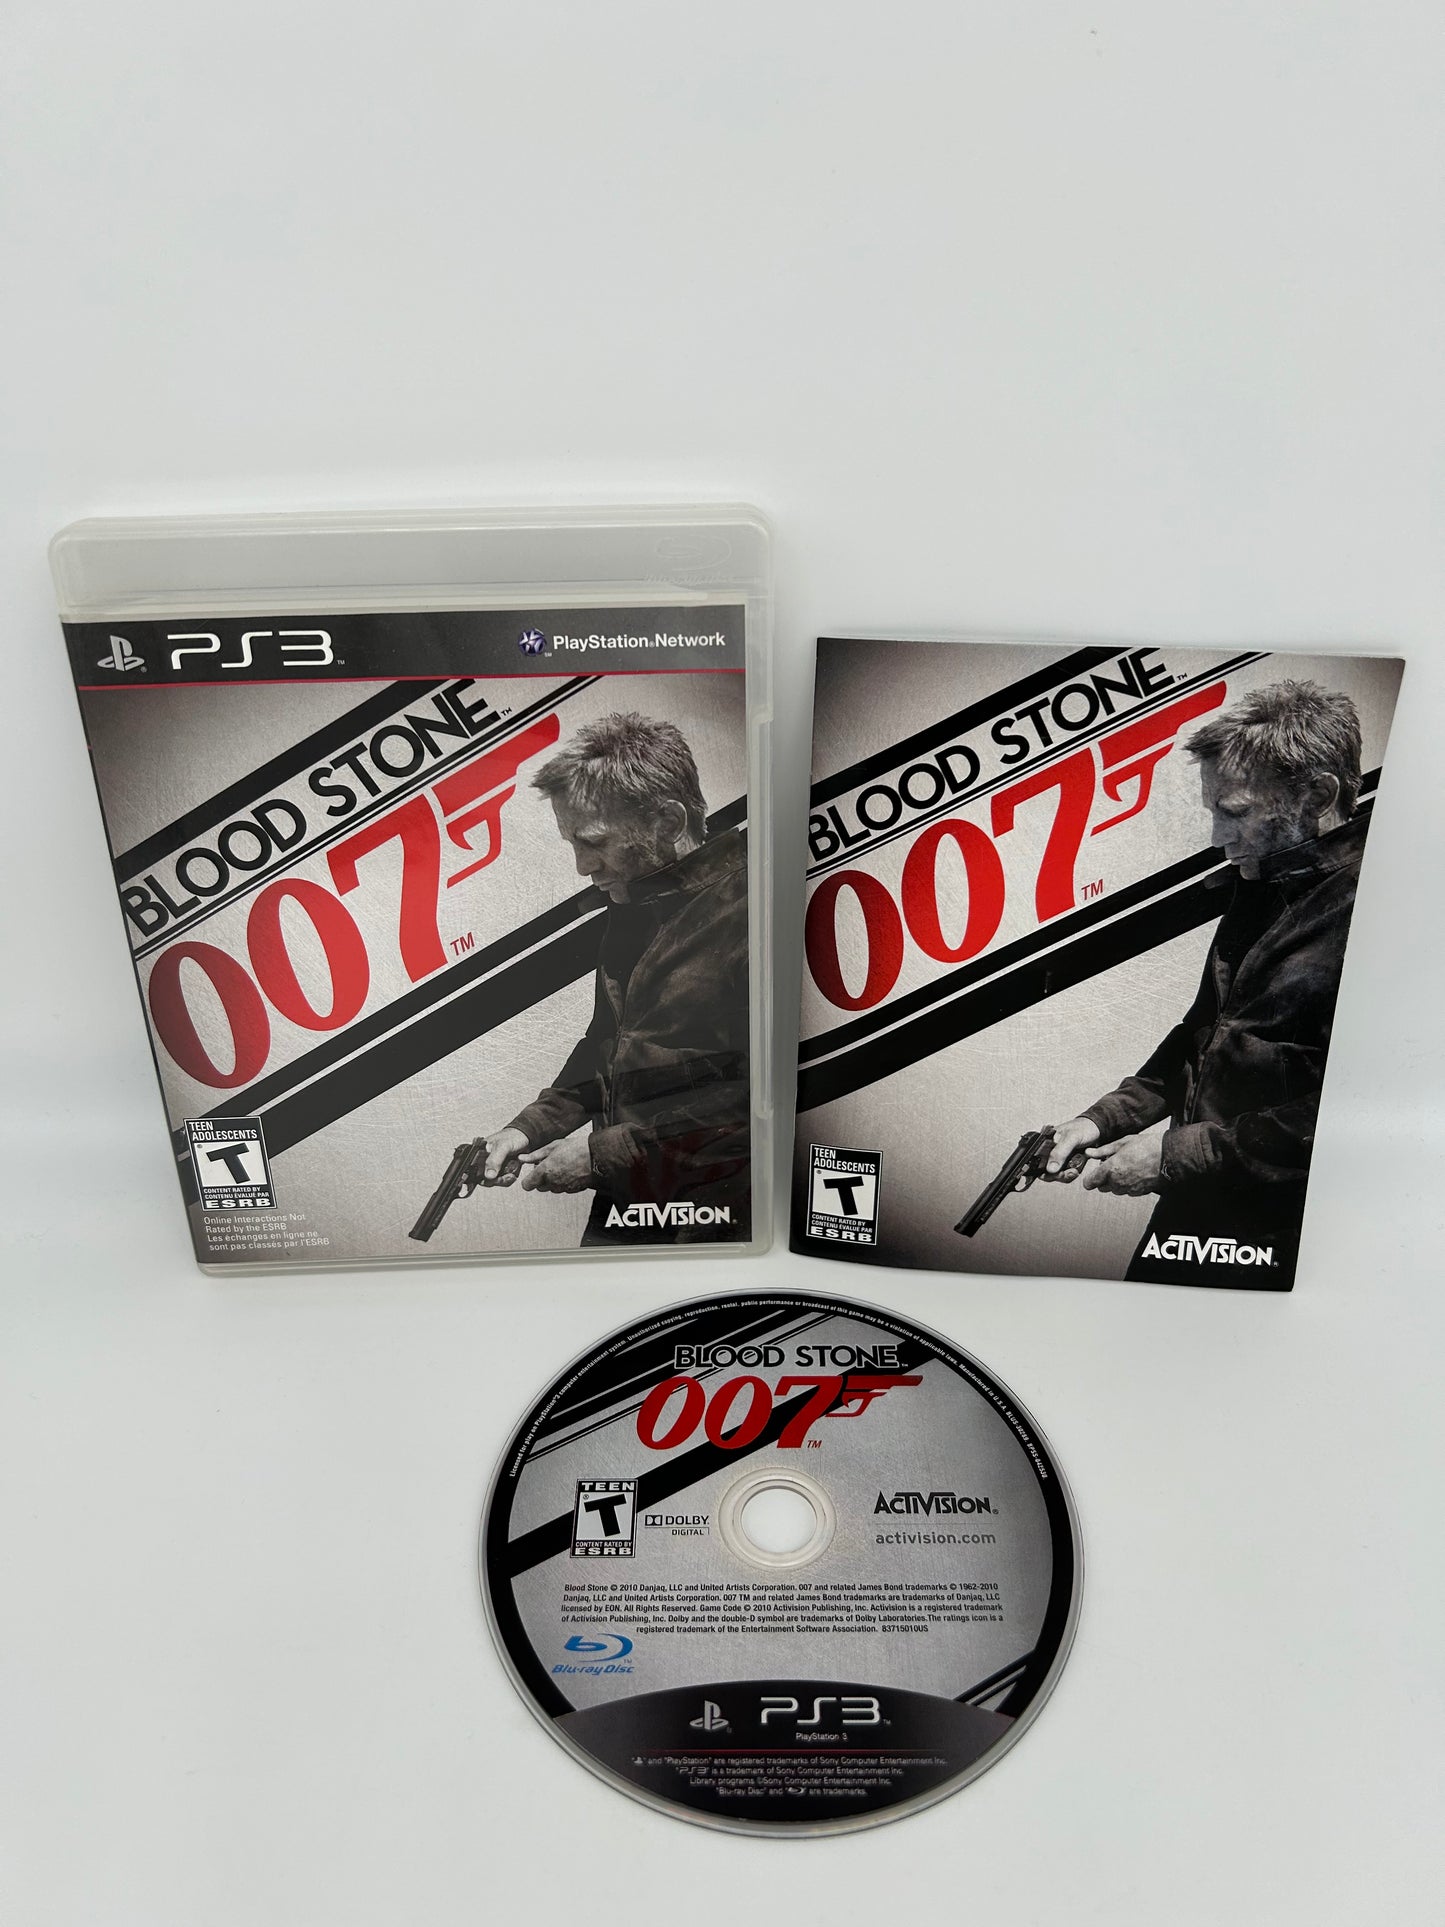 PiXEL-RETRO.COM : SONY PLAYSTATION 3 (PS3) COMPLETE IN BOX CIB MANUAL GAME NTSC 007 BLOOD STONE